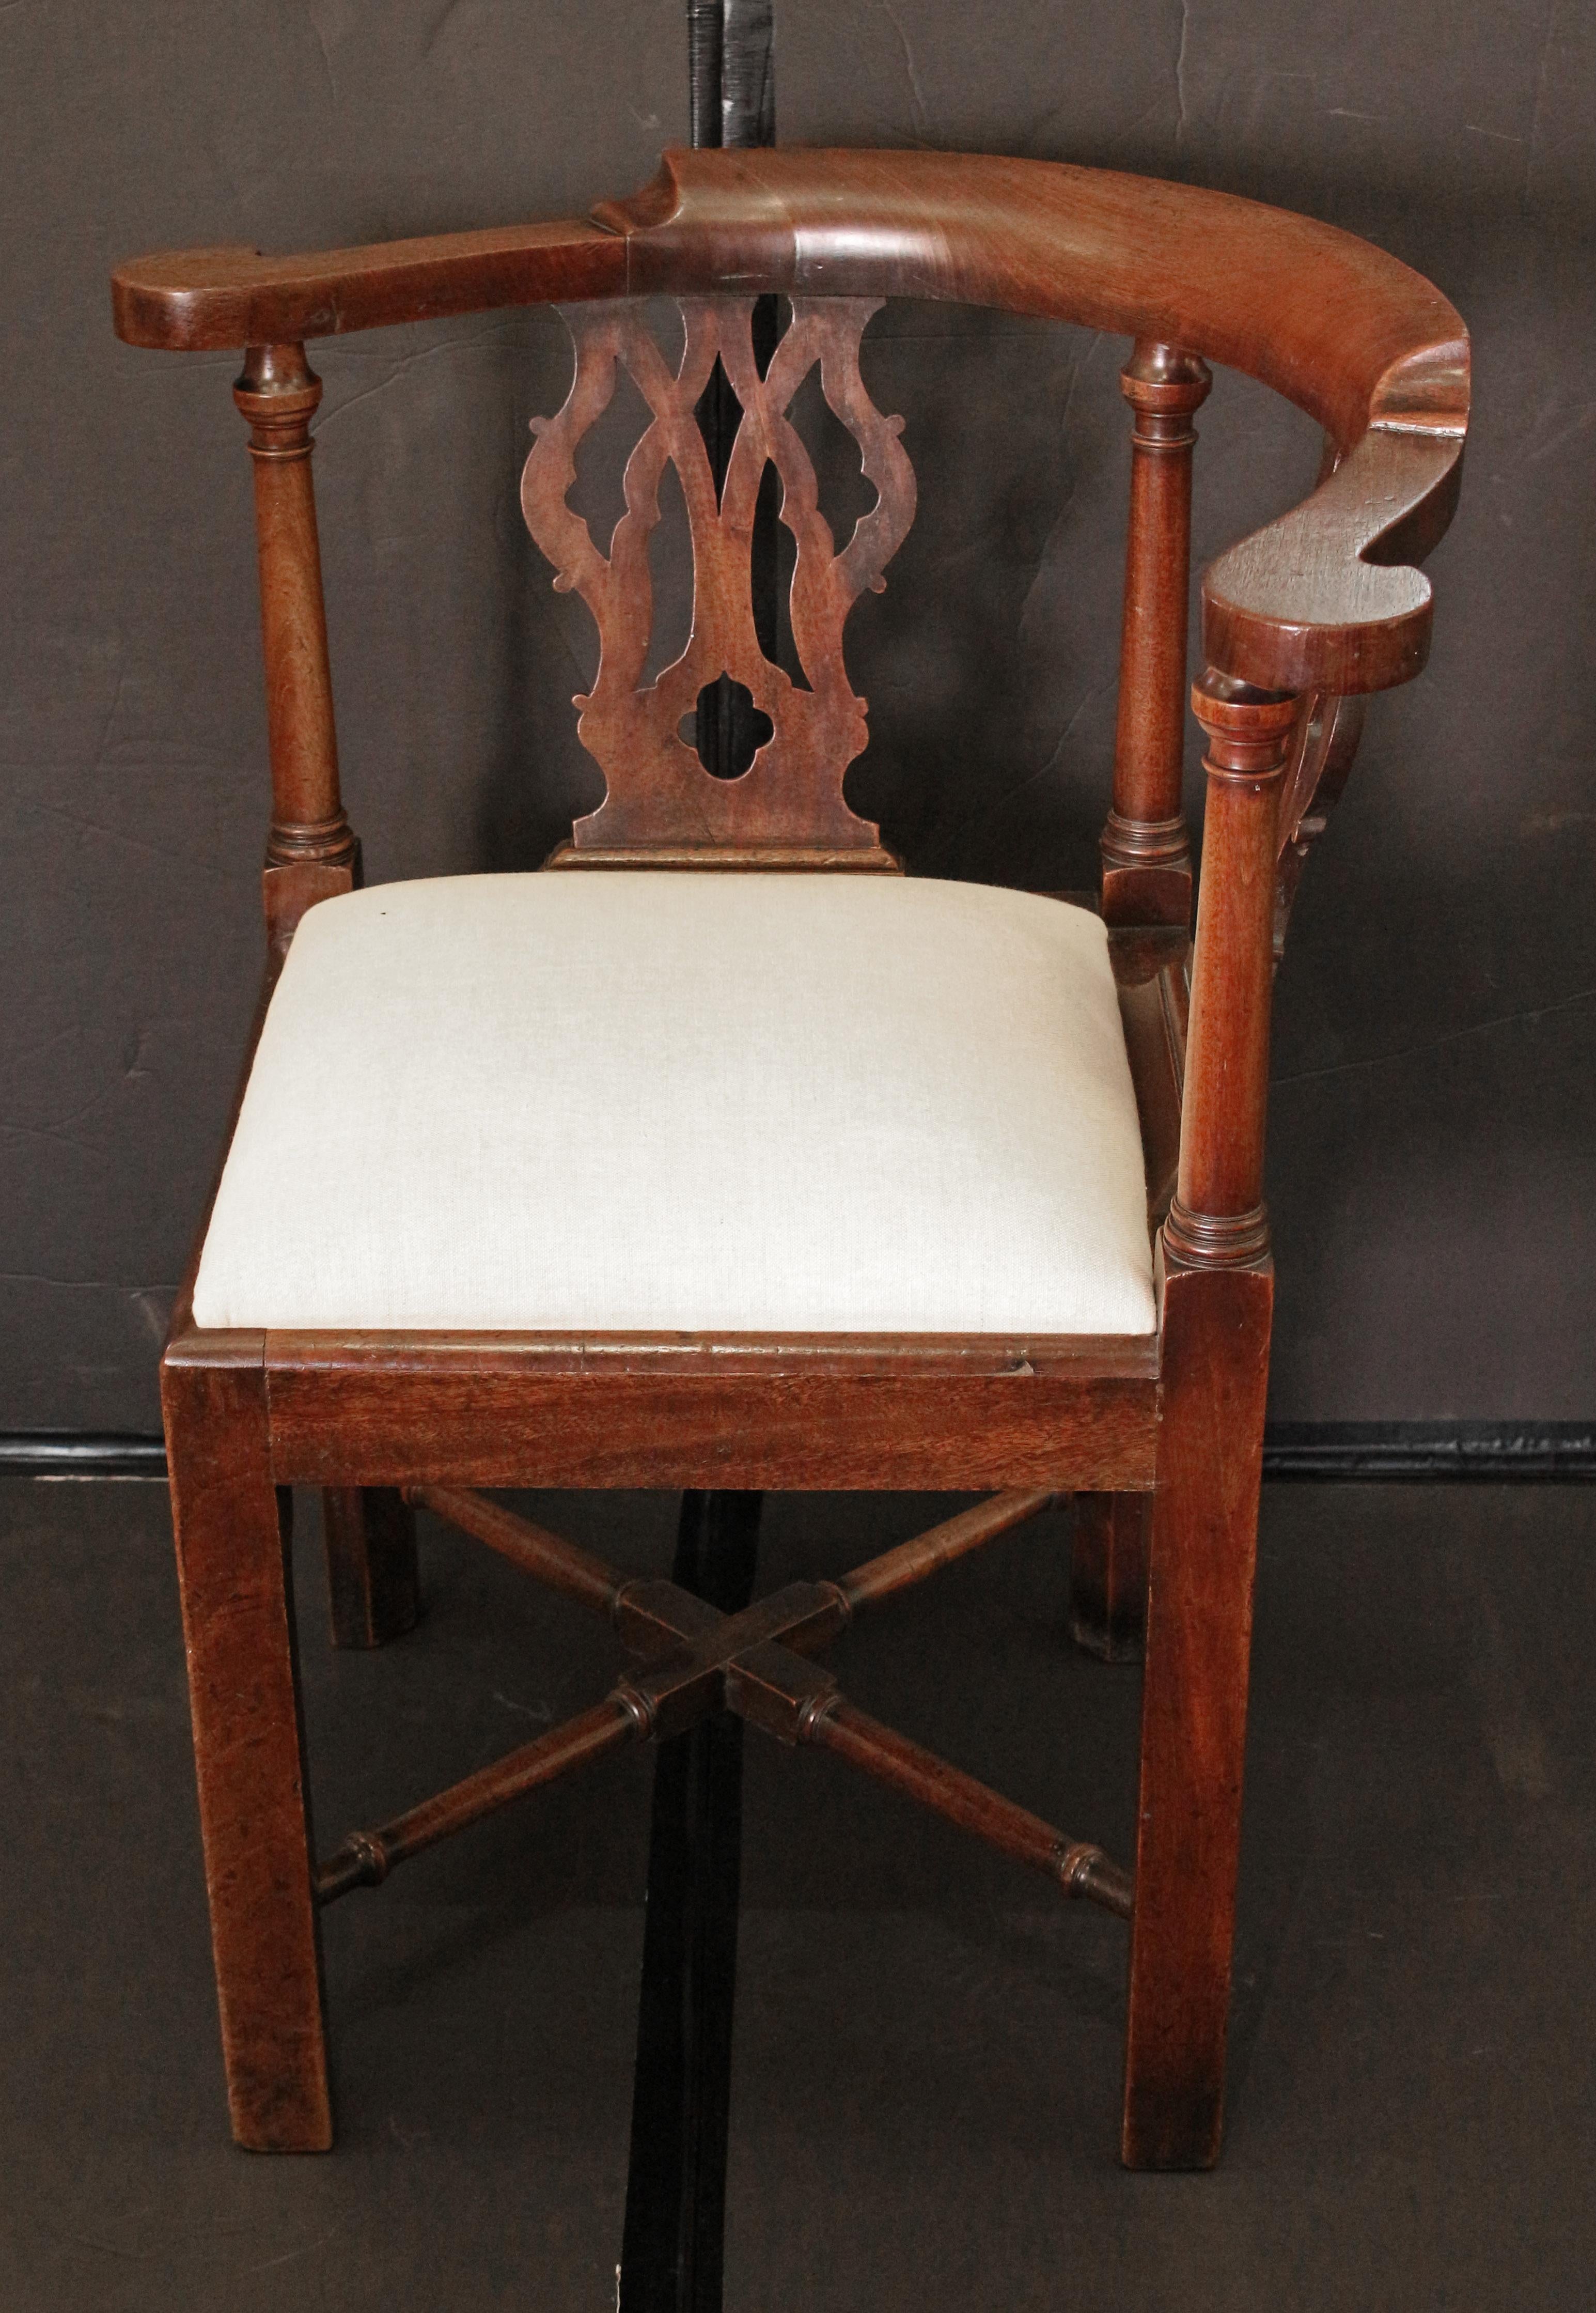 Circa 1760-80 George III period corner chair, English. Mahogany of good color. Once with deep aprons to likely conceal a chamber pot, now re-braced with and slip seat. Ring-carved, turned X form cross-stretcher. Straight, square legs with interior